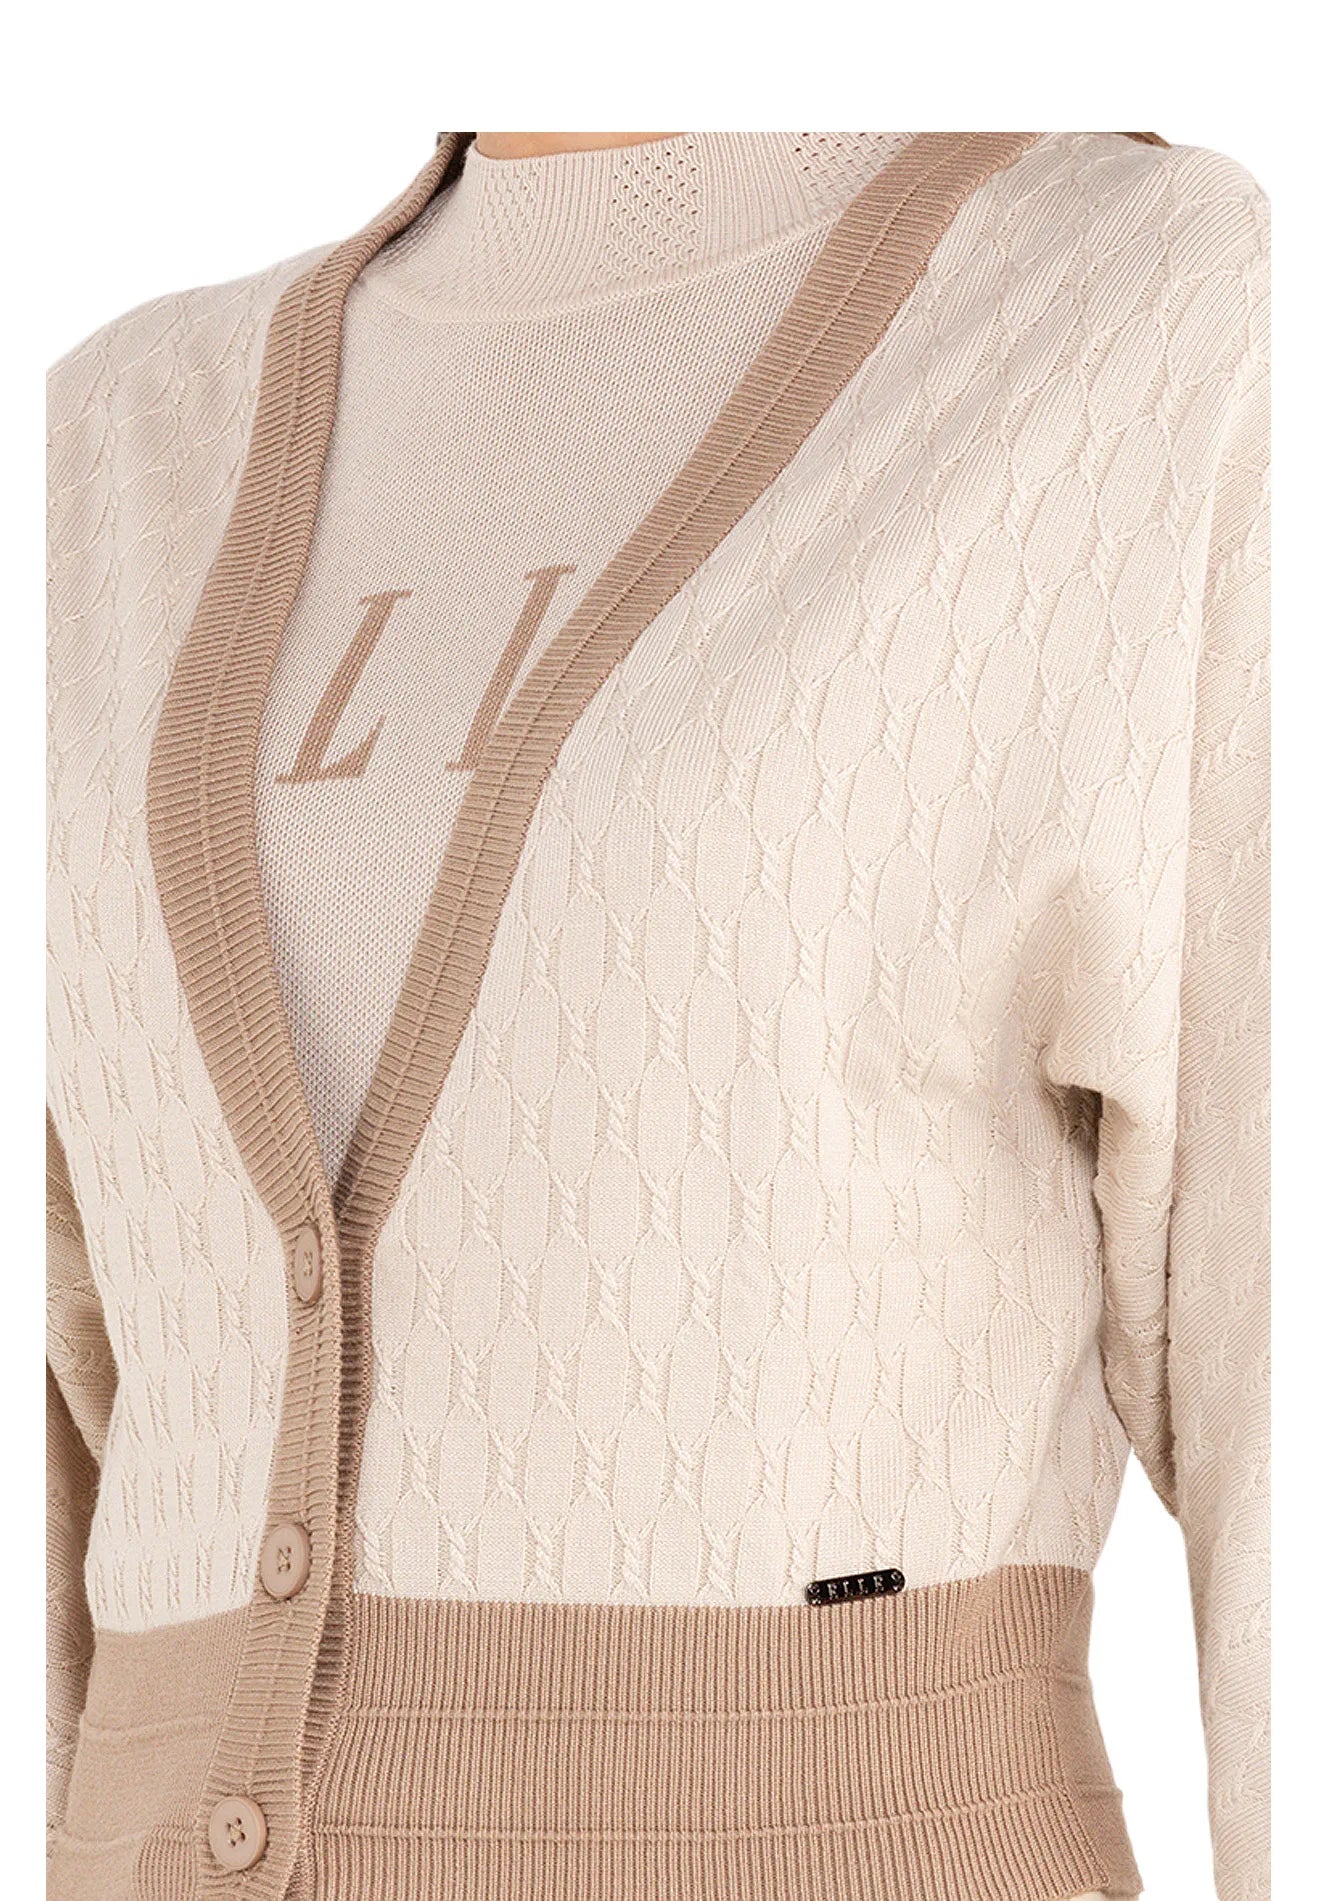 ELLE Appare Buttons Knitted Geometric Cardigan